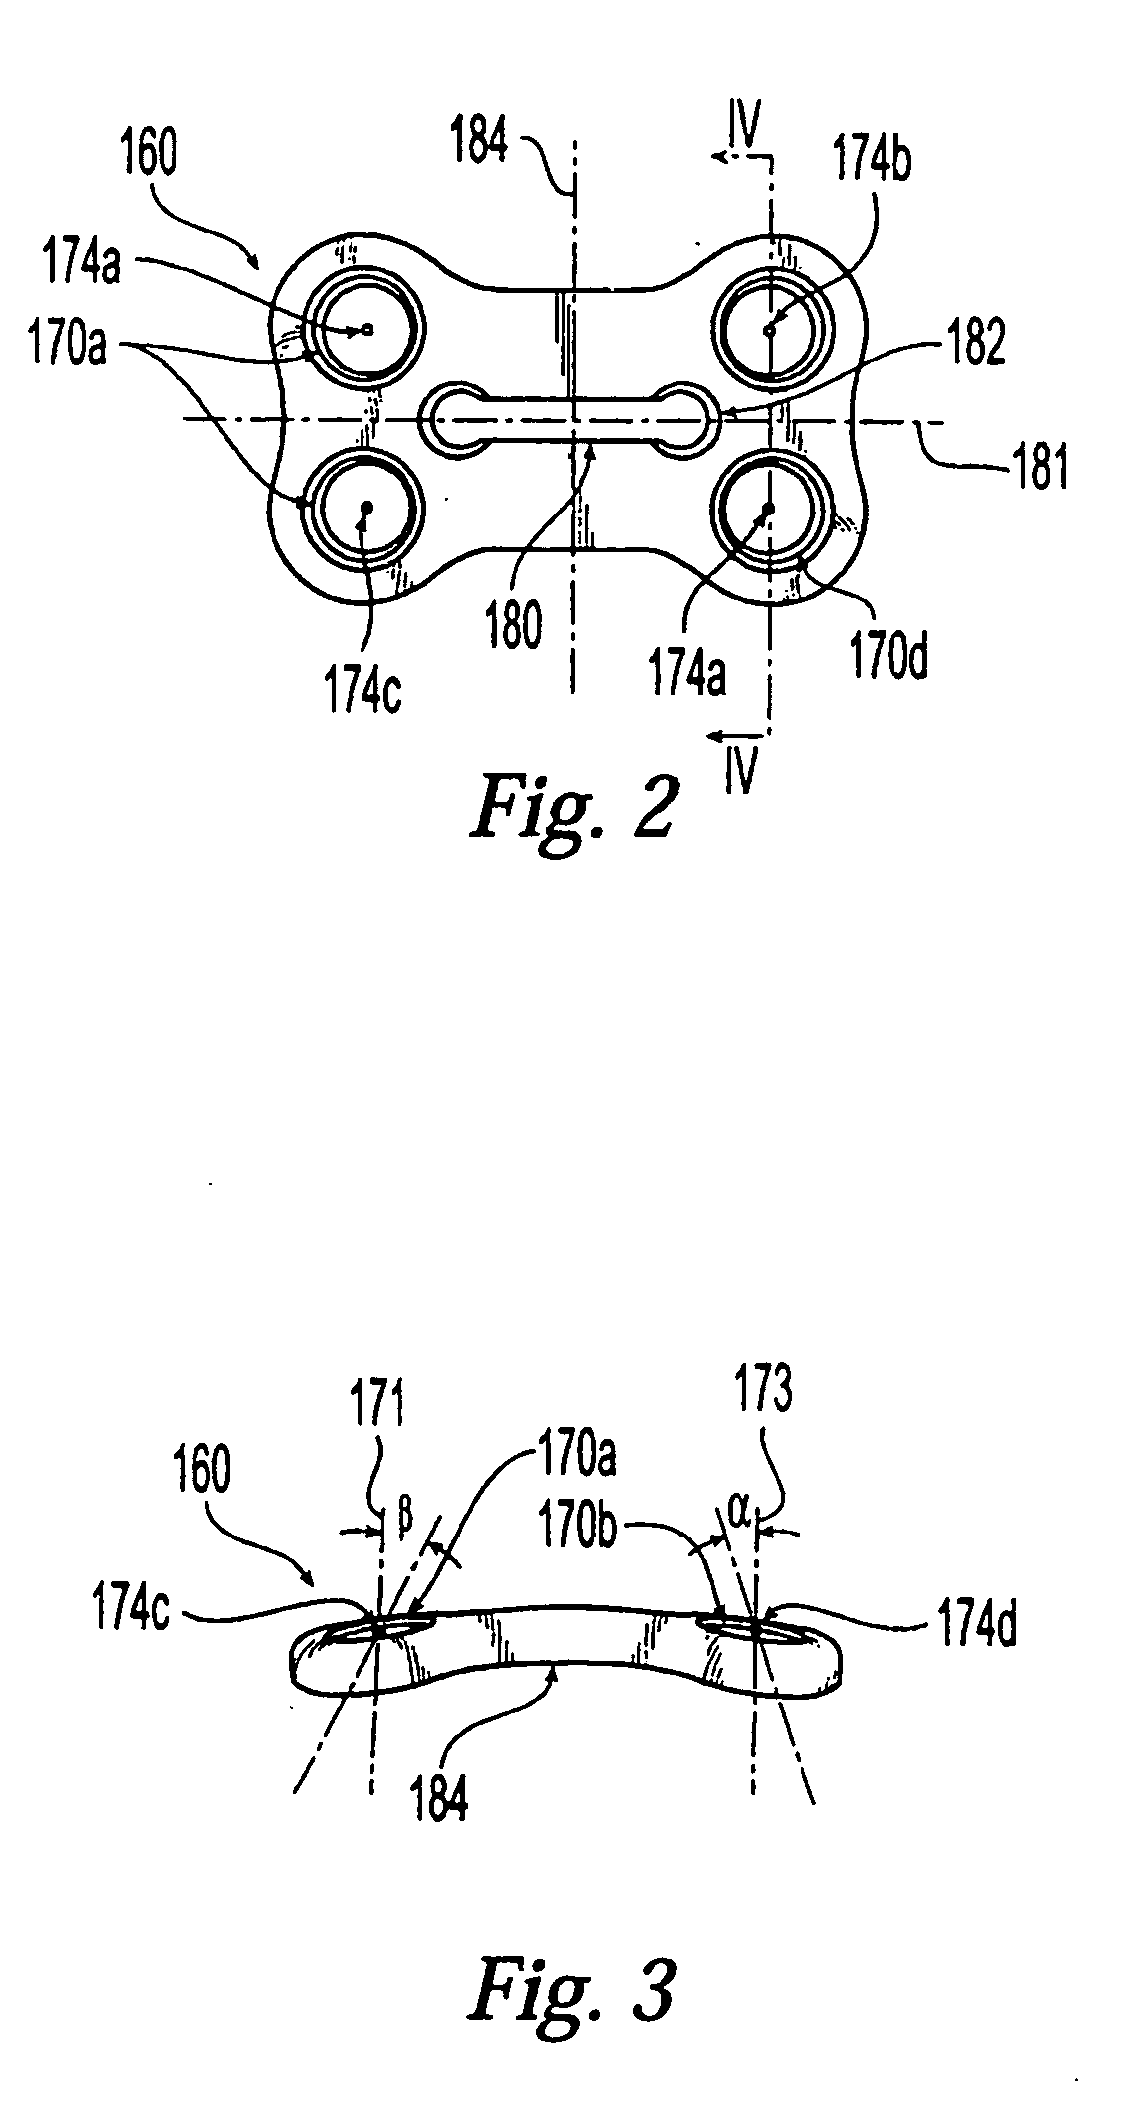 Plating system with compression drill guide